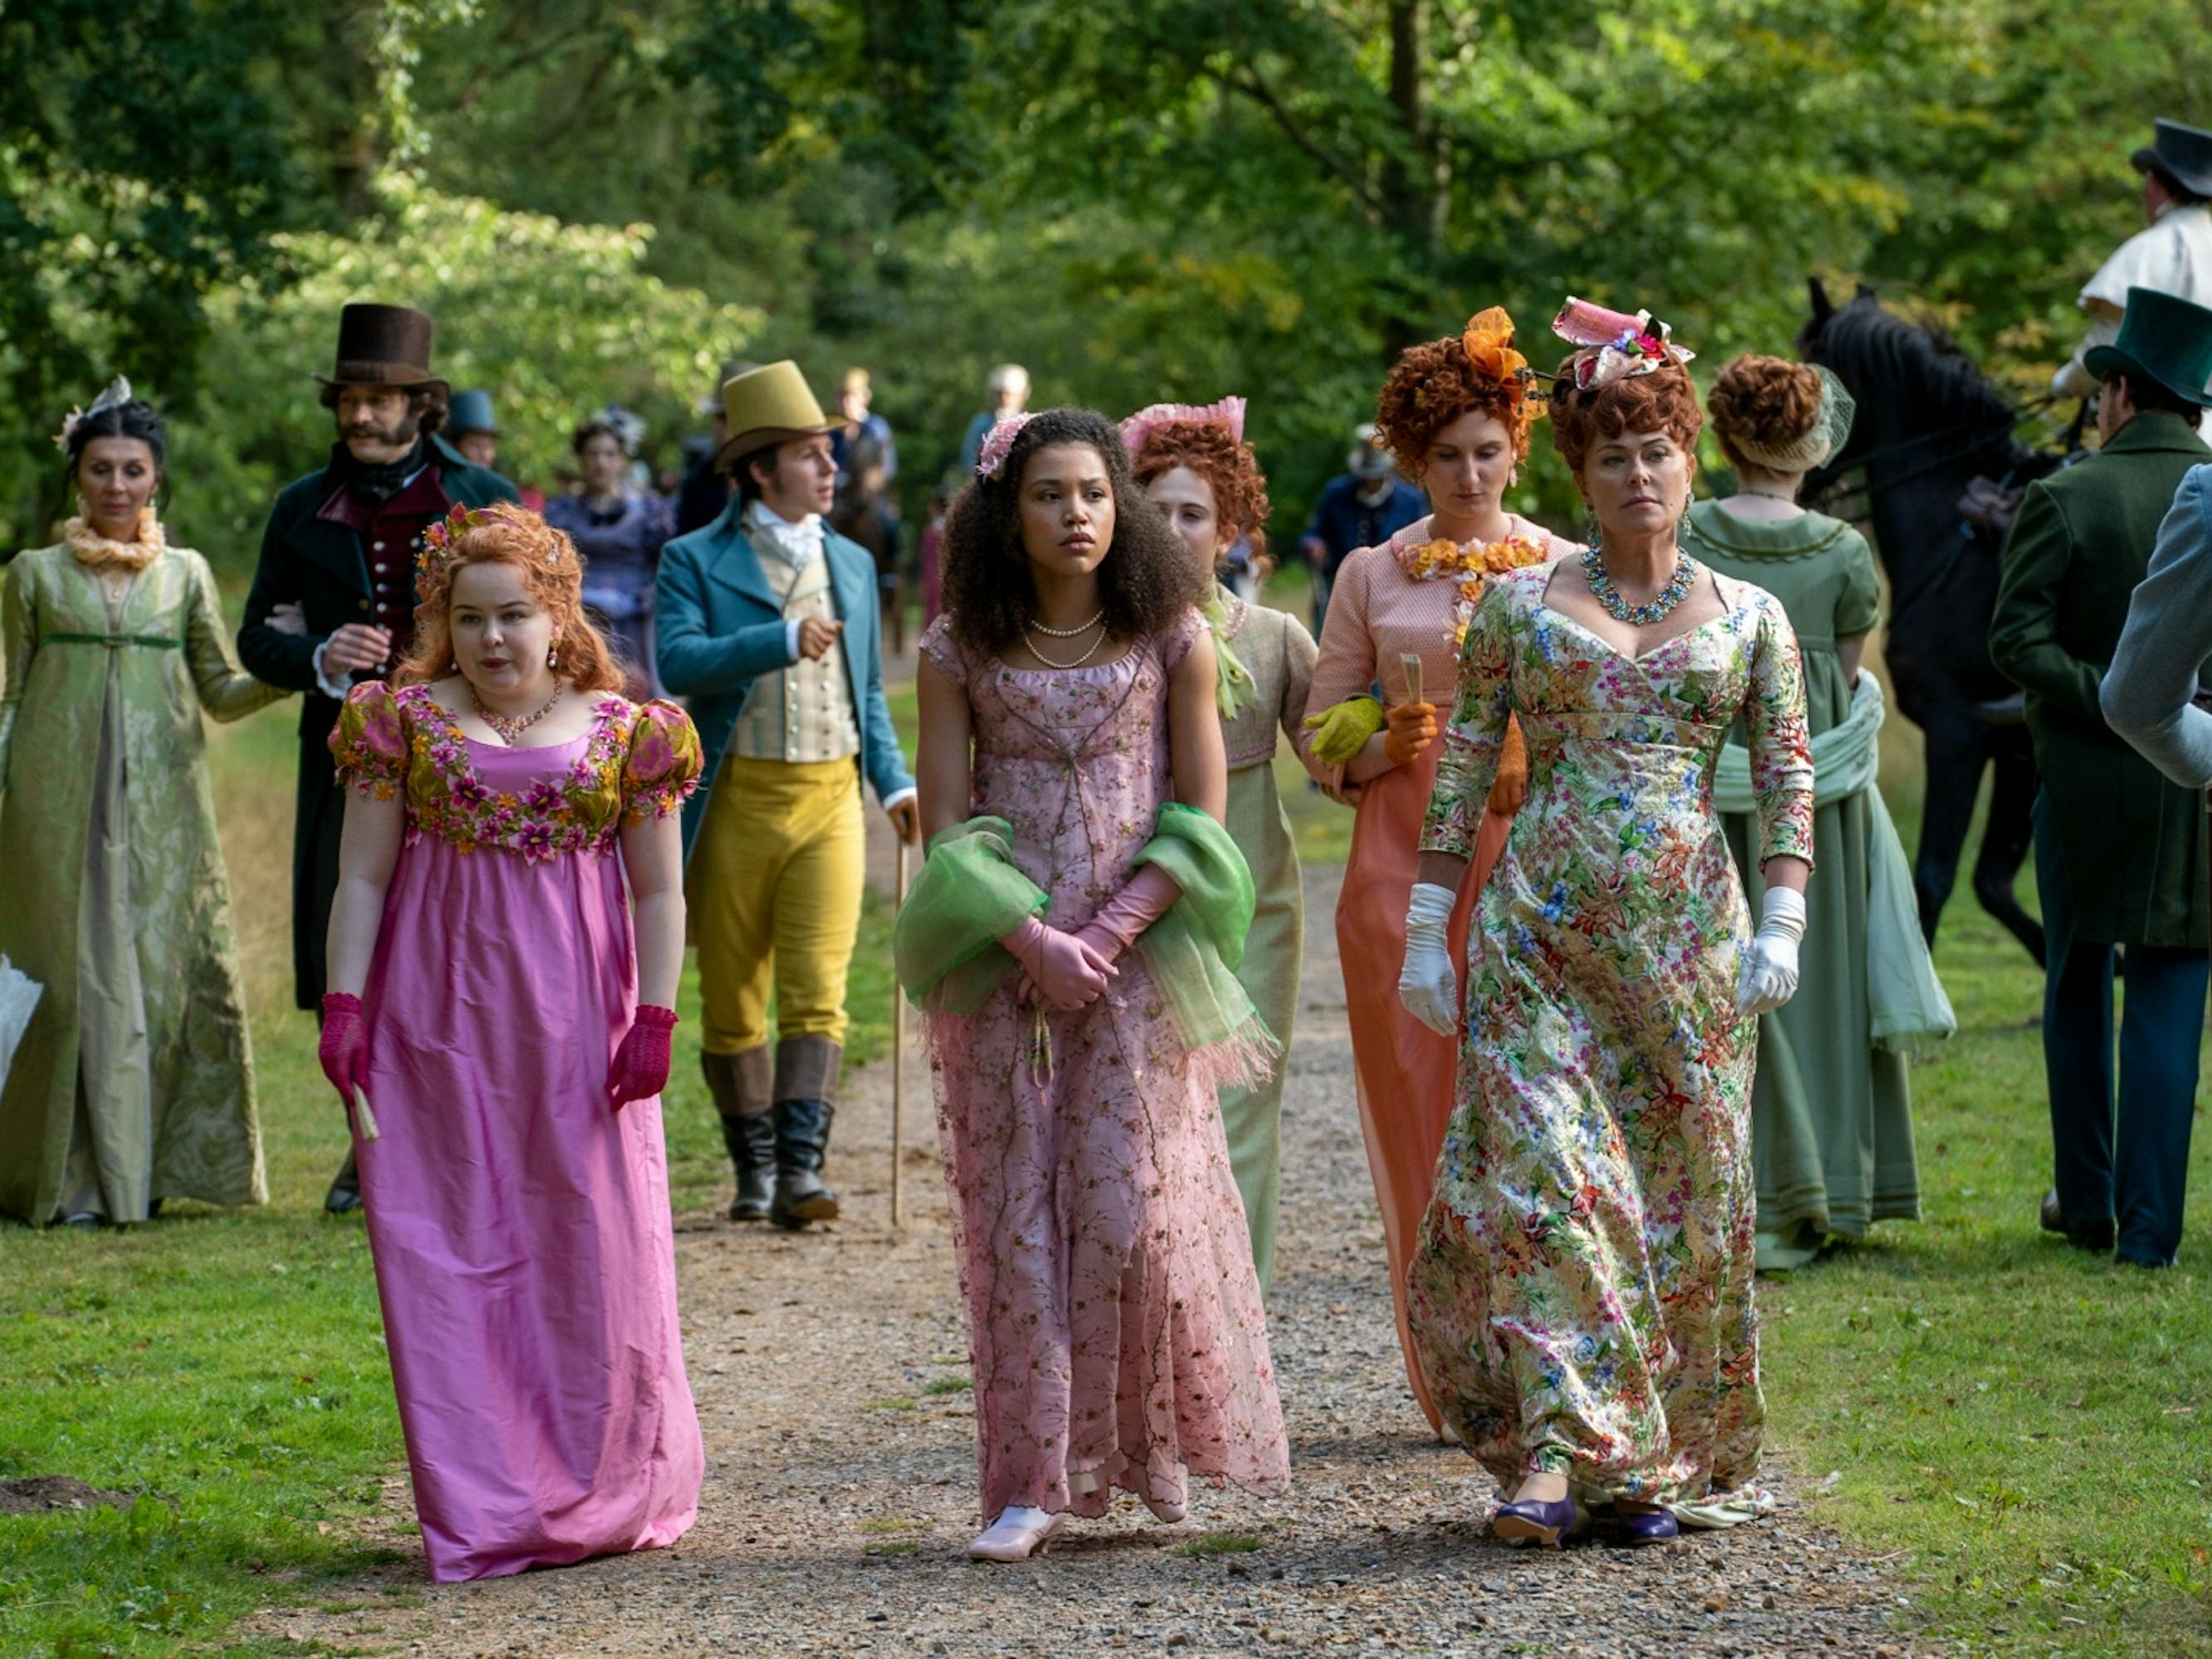 Penelope Featherington (Nicola Coughlan) and her family walk down a gravel path. They are surrounded by other people in equally as elaborate gowns, and men wearing suits with top hats. Between the prints and the greenery, the scene is bright and cheery despite Lady Featherington’s cold expression.